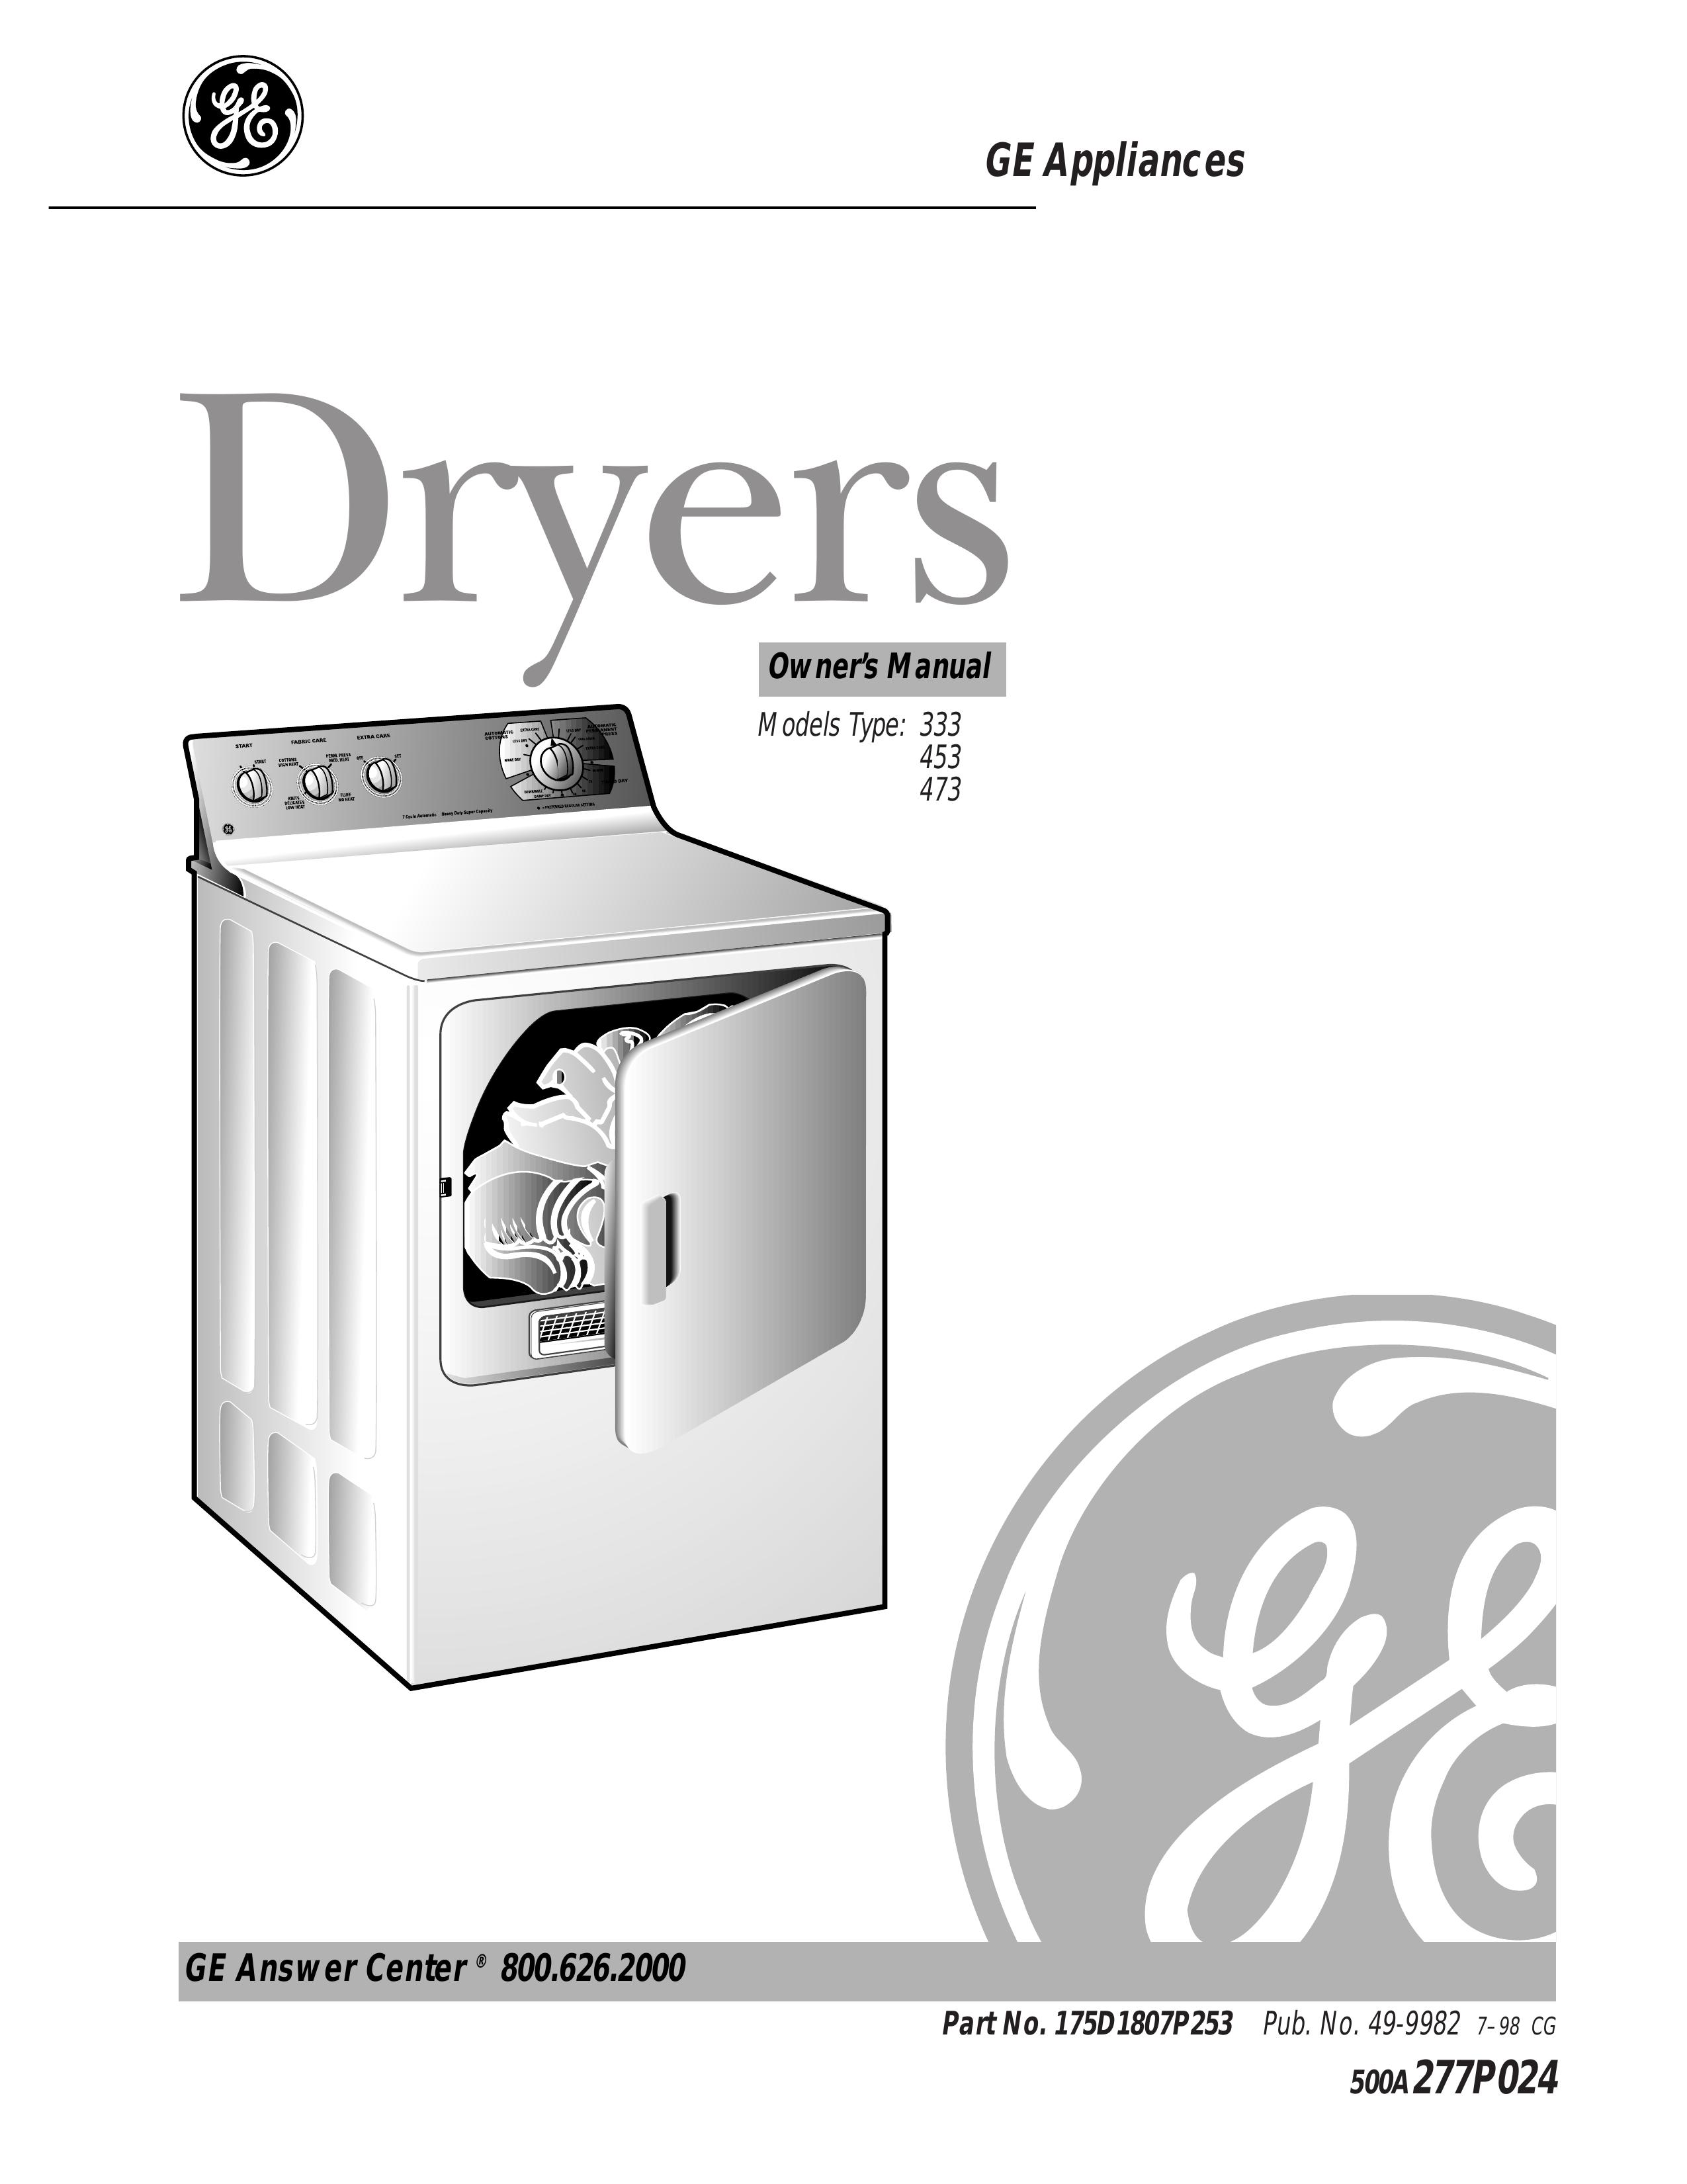 GE 473 Clothes Dryer User Manual